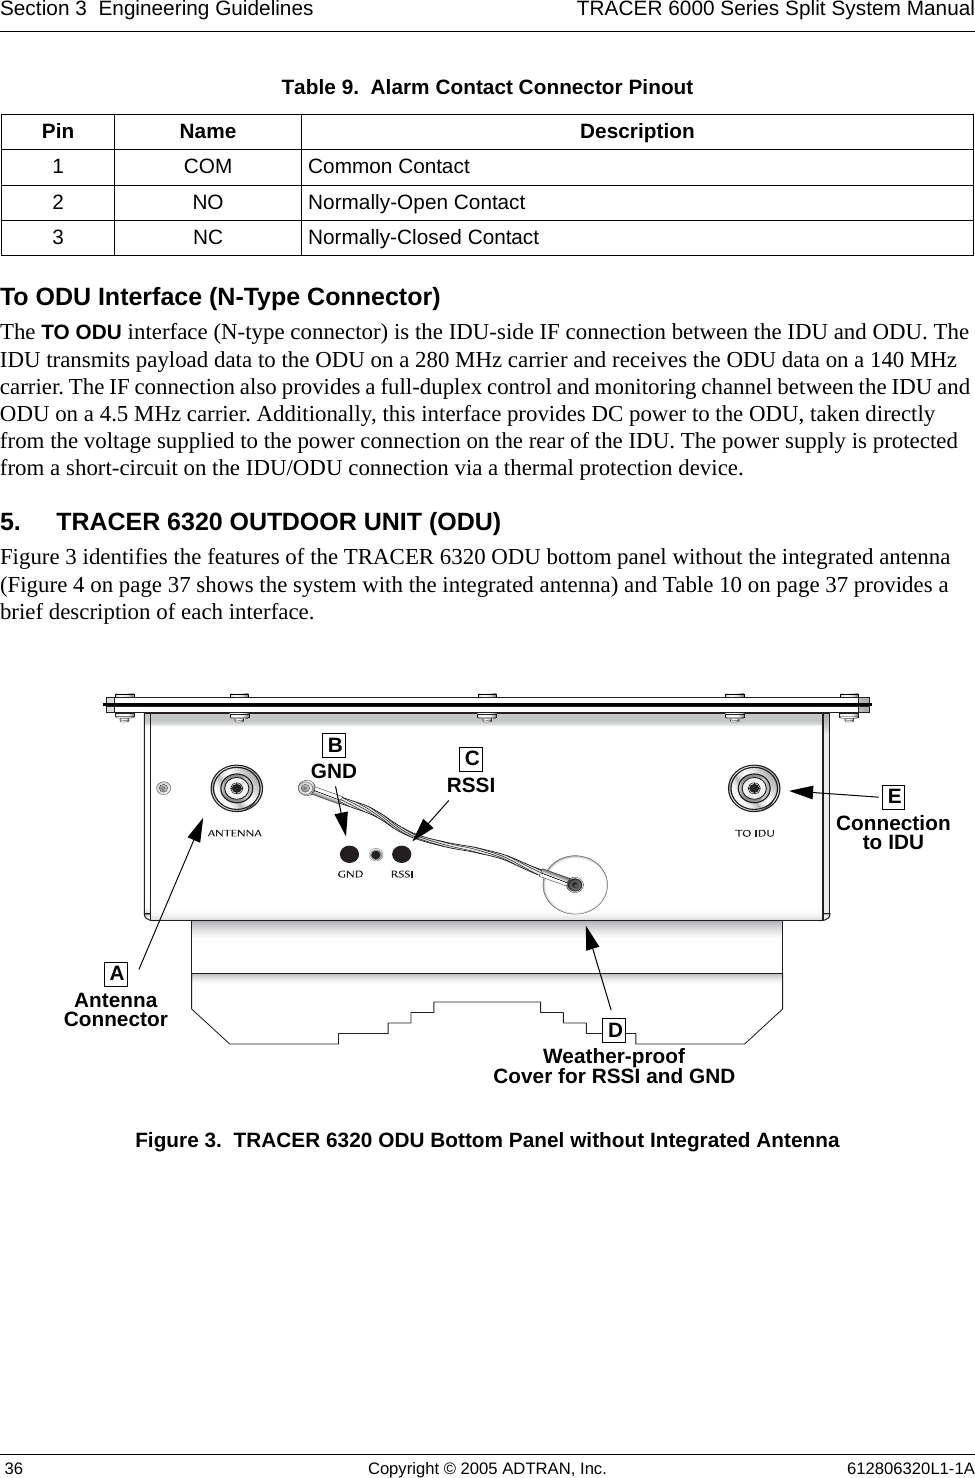 Section 3  Engineering Guidelines TRACER 6000 Series Split System Manual 36 Copyright © 2005 ADTRAN, Inc. 612806320L1-1ATo ODU Interface (N-Type Connector)The TO ODU interface (N-type connector) is the IDU-side IF connection between the IDU and ODU. The IDU transmits payload data to the ODU on a 280 MHz carrier and receives the ODU data on a 140 MHz carrier. The IF connection also provides a full-duplex control and monitoring channel between the IDU and ODU on a 4.5 MHz carrier. Additionally, this interface provides DC power to the ODU, taken directly from the voltage supplied to the power connection on the rear of the IDU. The power supply is protected from a short-circuit on the IDU/ODU connection via a thermal protection device.5. TRACER 6320 OUTDOOR UNIT (ODU)Figure 3 identifies the features of the TRACER 6320 ODU bottom panel without the integrated antenna (Figure 4 on page 37 shows the system with the integrated antenna) and Table 10 on page 37 provides a brief description of each interface. Figure 3.  TRACER 6320 ODU Bottom Panel without Integrated AntennaTable 9.  Alarm Contact Connector Pinout Pin Name Description1 COM Common Contact2NO Normally-Open Contact3NC Normally-Closed ContactAntennaConnectorAGNDBRSSICWeather-proofCover for RSSI and GNDDConnectionto IDUE